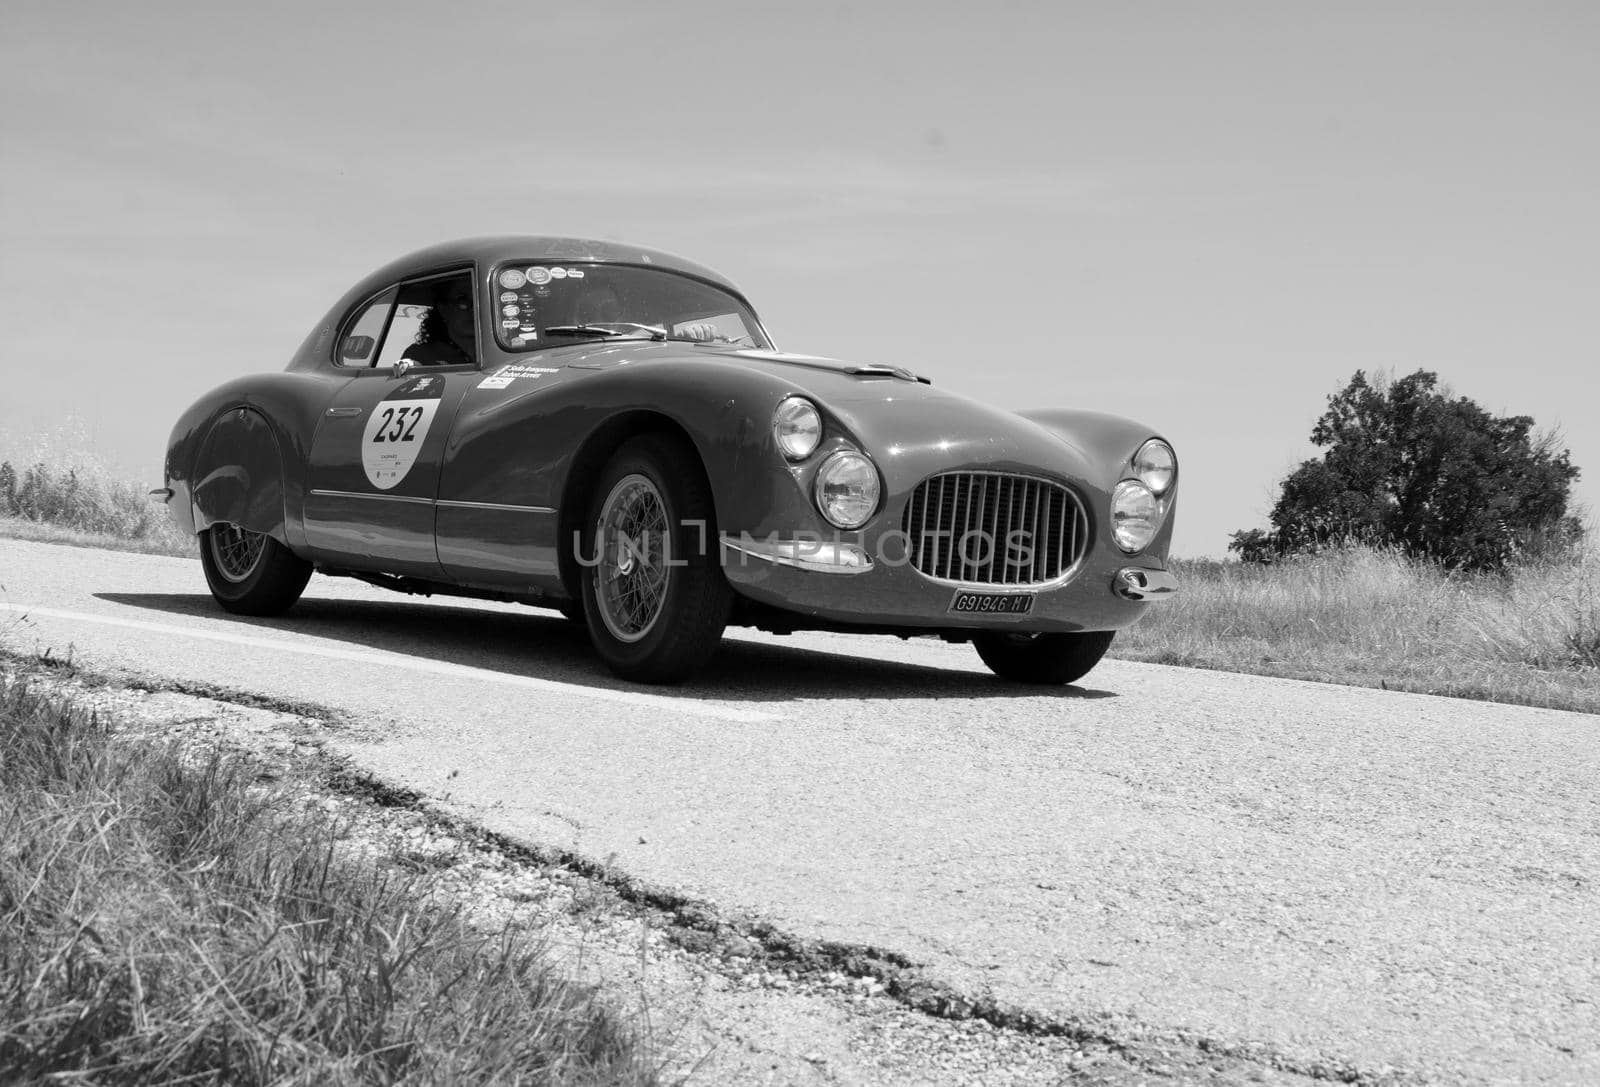 FIAT 8V BERLINETTA 1952 on an old racing car in rally Mille Miglia 2022 the famous italian historical race (1927-1957 by massimocampanari